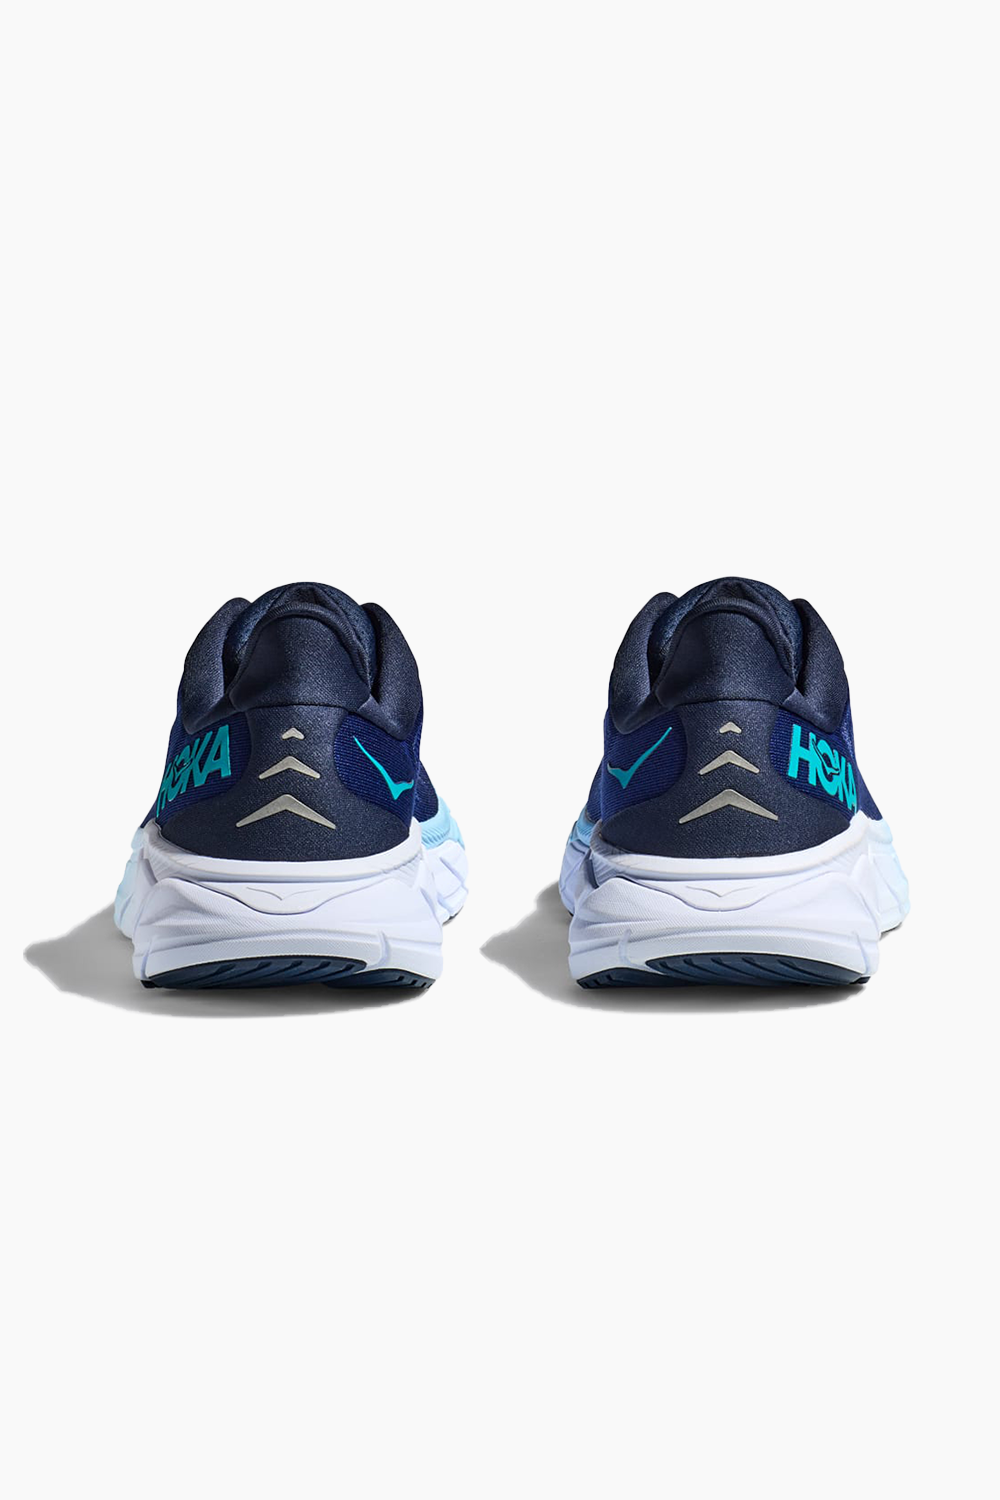 HOKA Men's Arahi 6 in Outer Space/Bellwether Blue